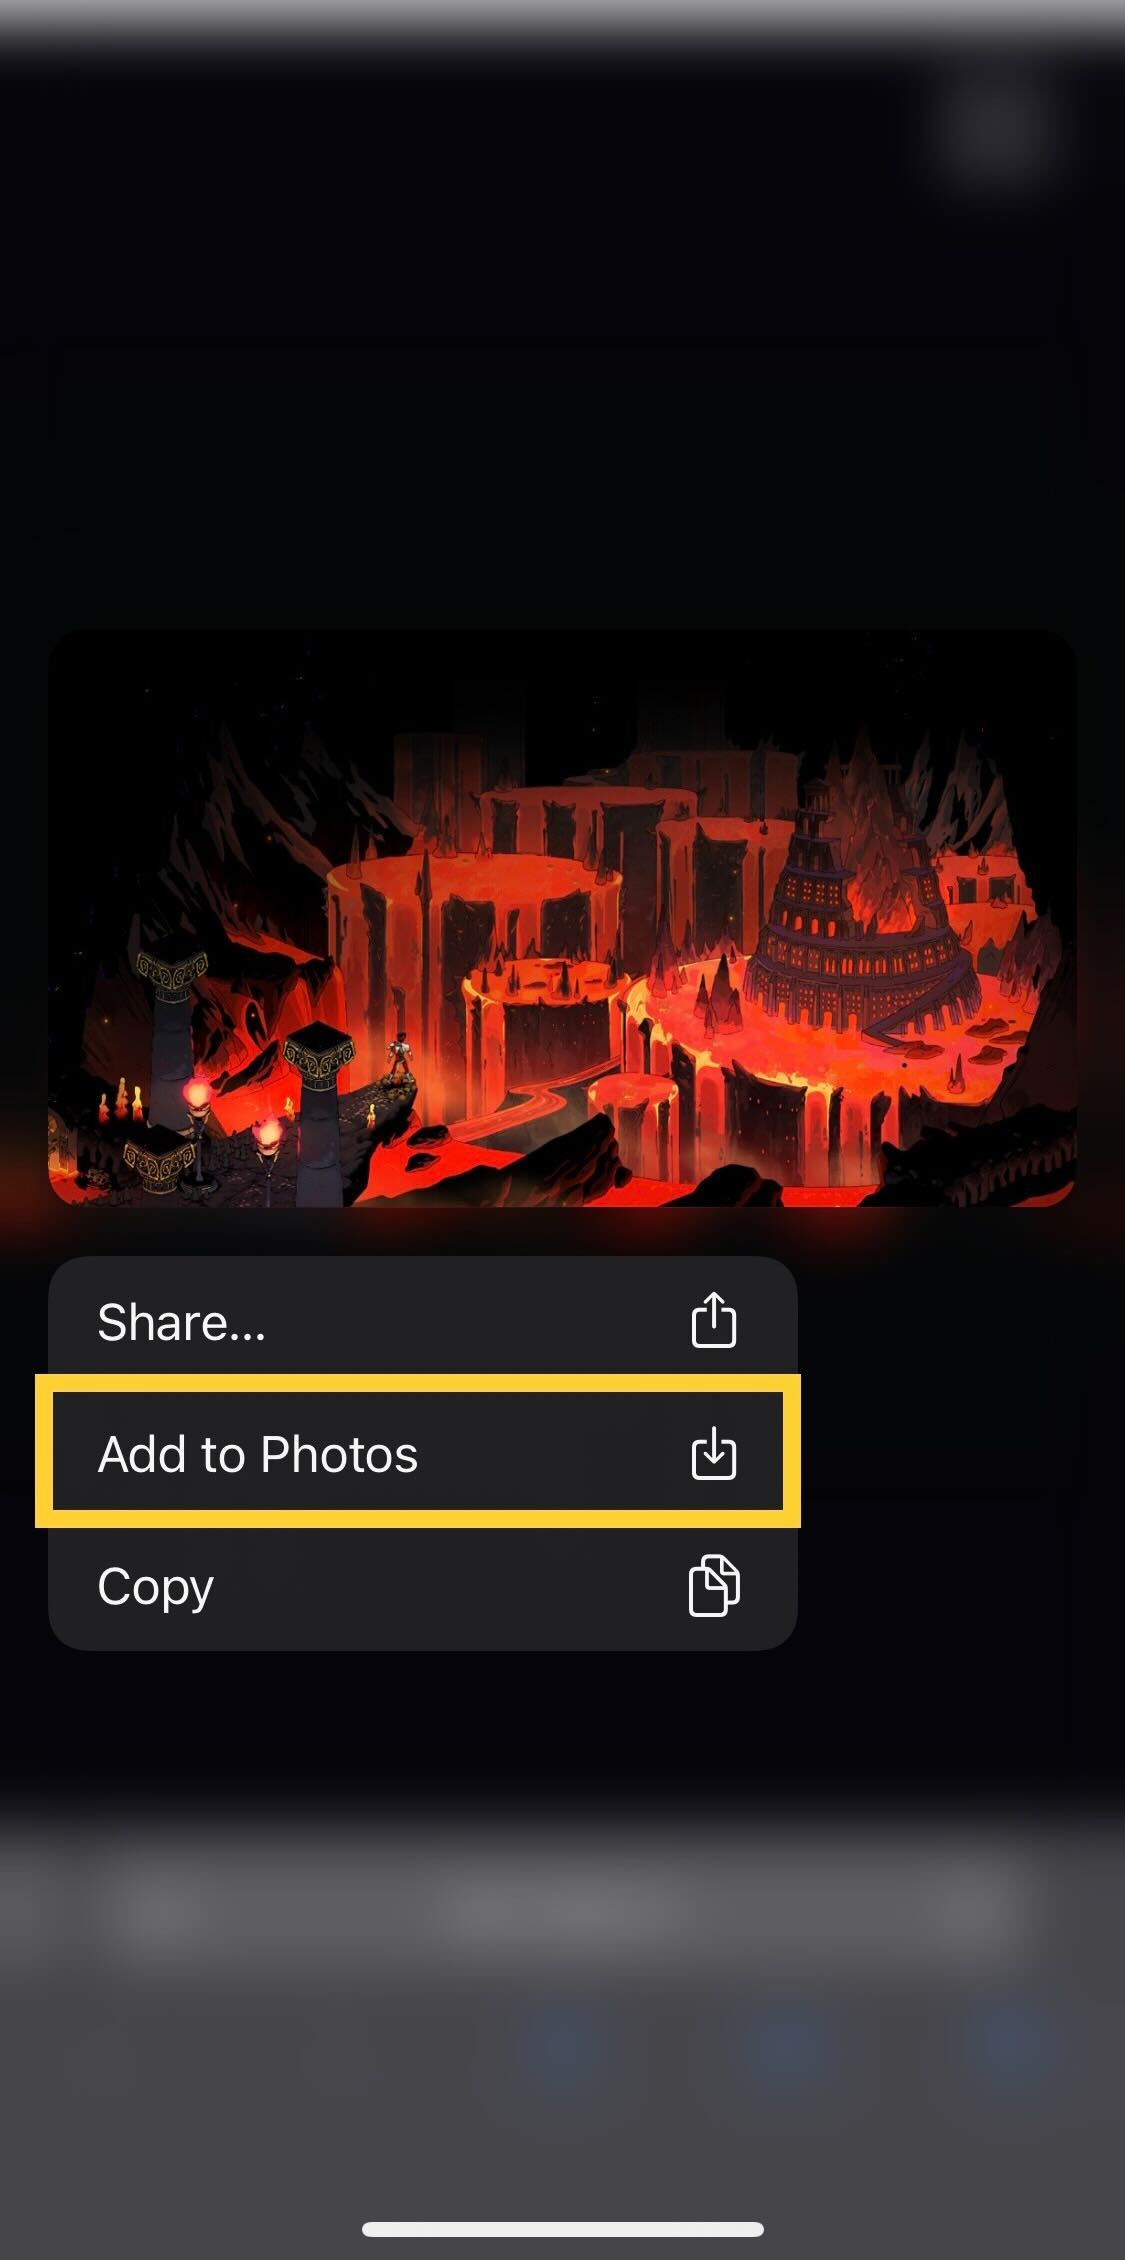 Click on the Add to Photos button